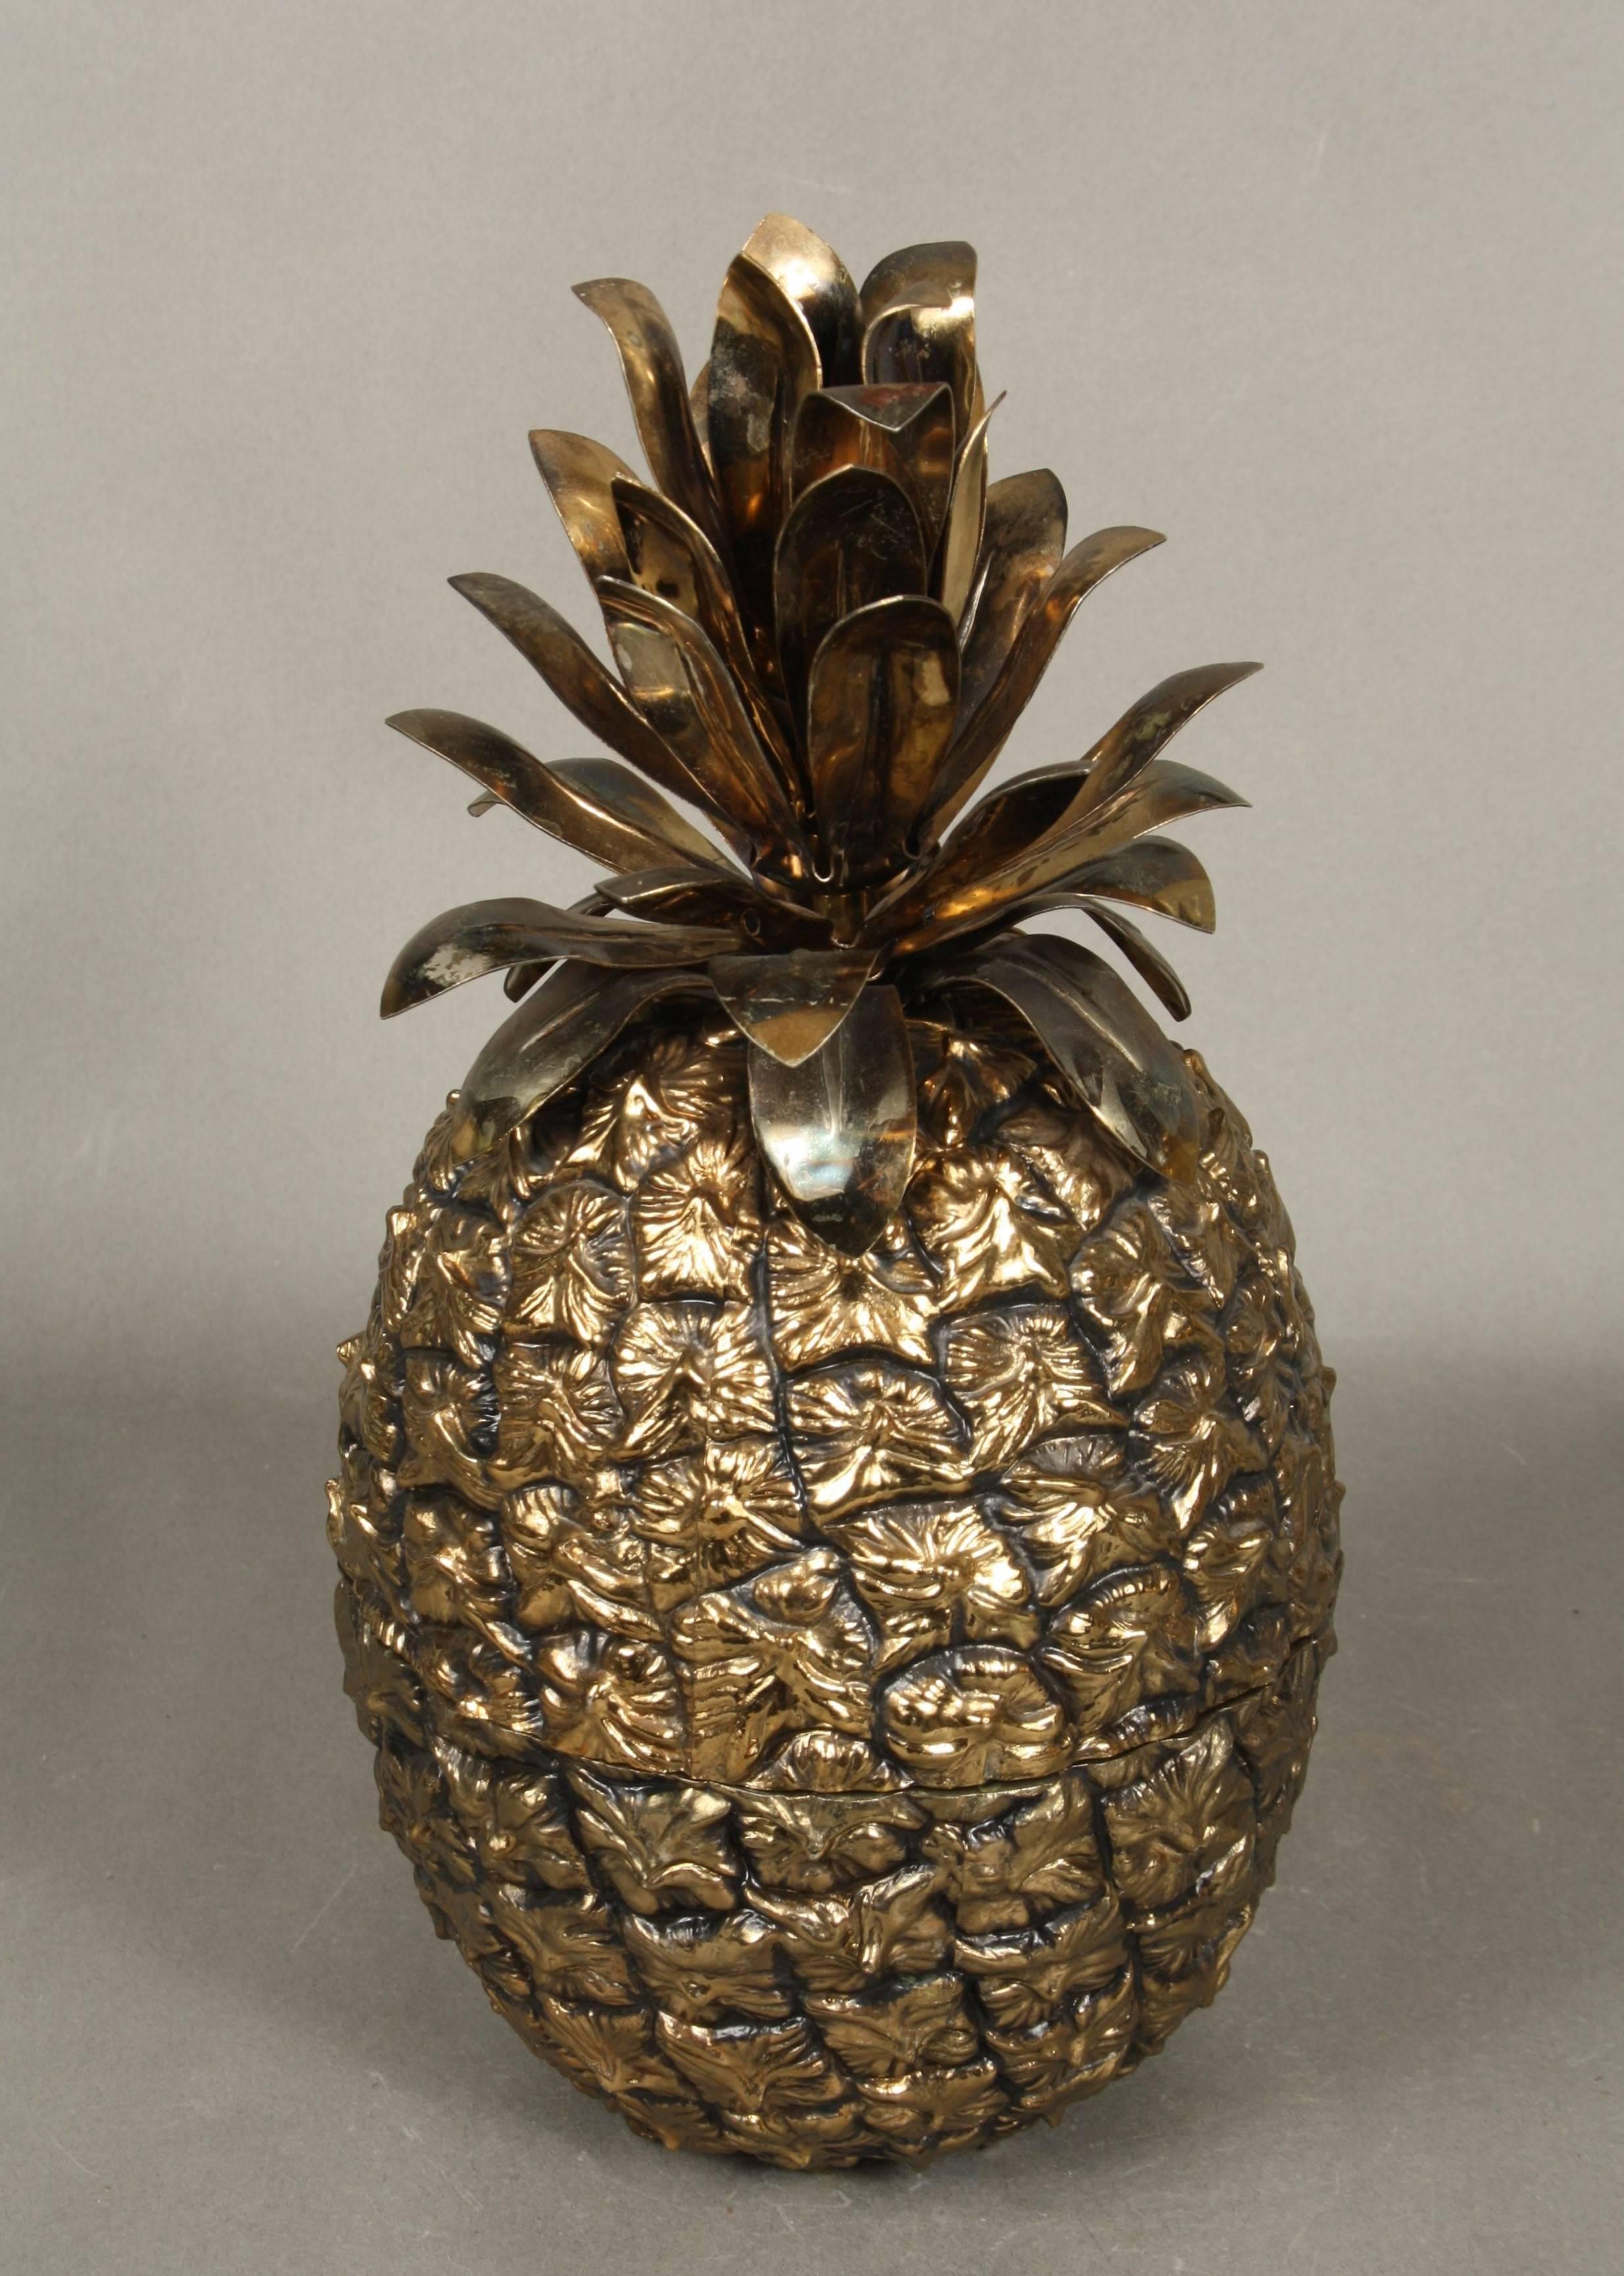 Swiss extra large gilt colored Freddo Therm pineapple ice bucket, 1960s. Awesome gilt colored 1960s, Freddo Therm pineapple shaped ice bucket.
Signed inside the top Freddo Therm, Switzerland.